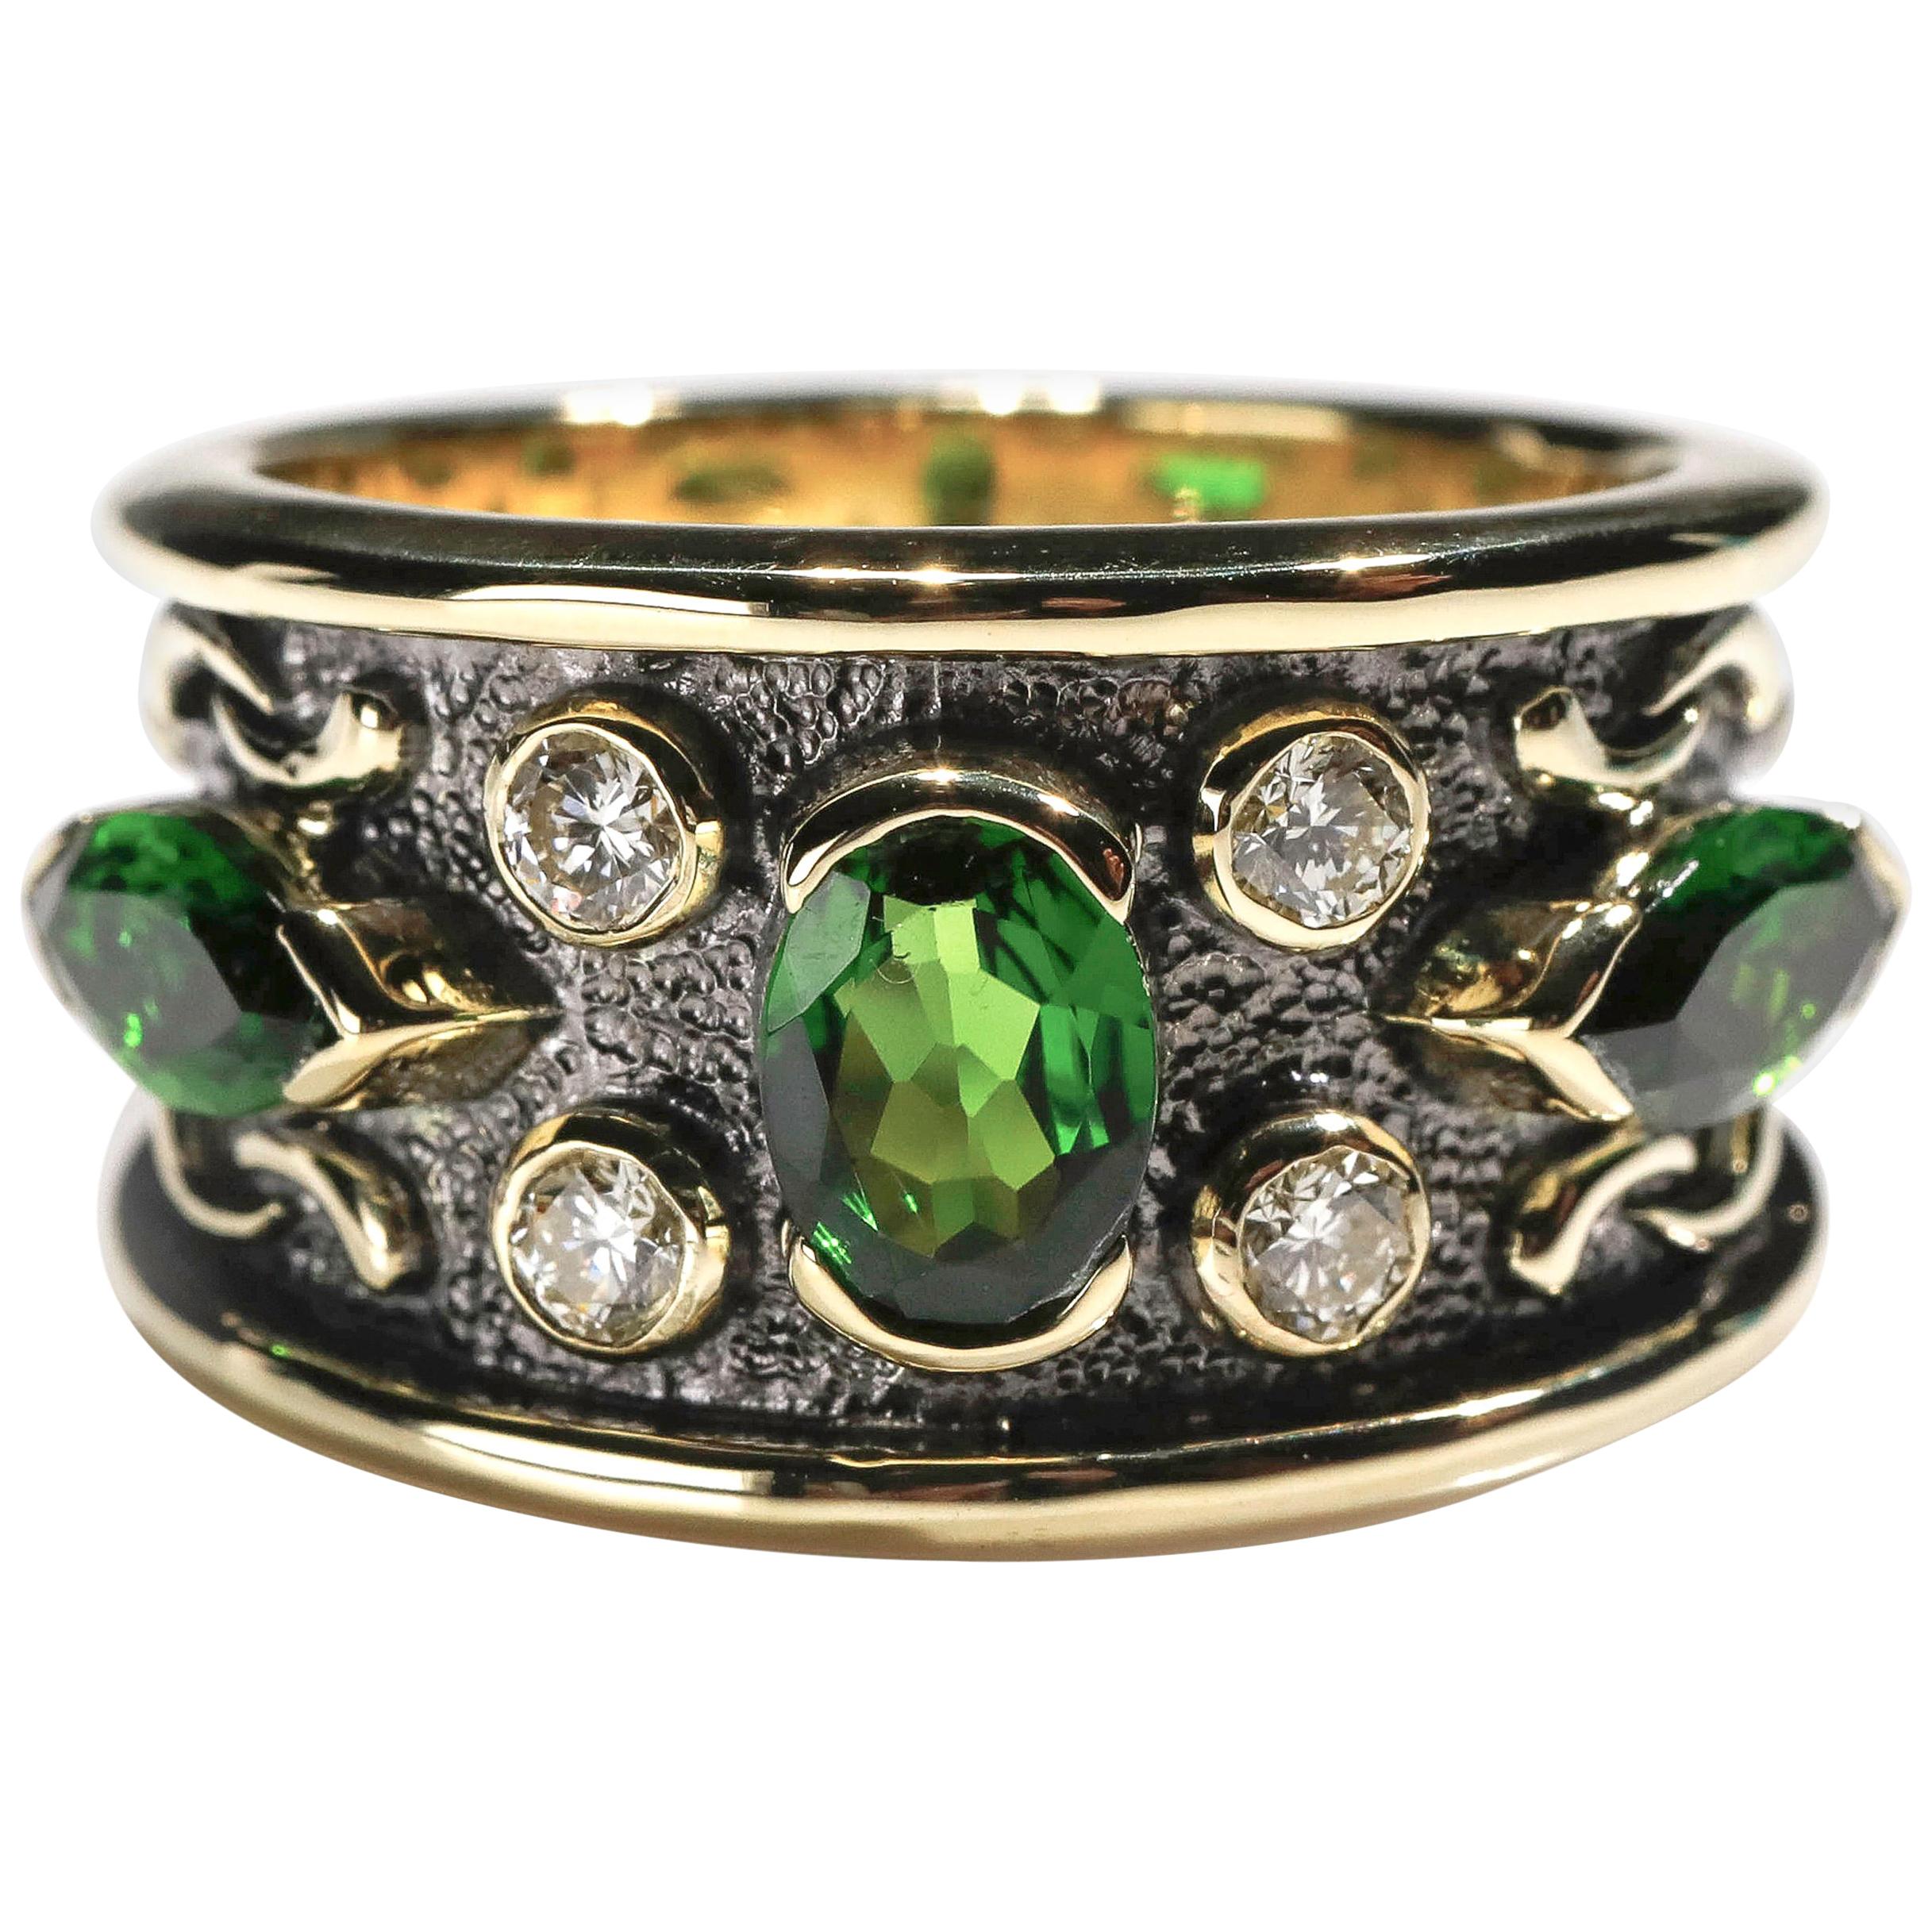 2.5 Carat Chrome Diopside Tourmaline and Diamond Band Ring US Size 6